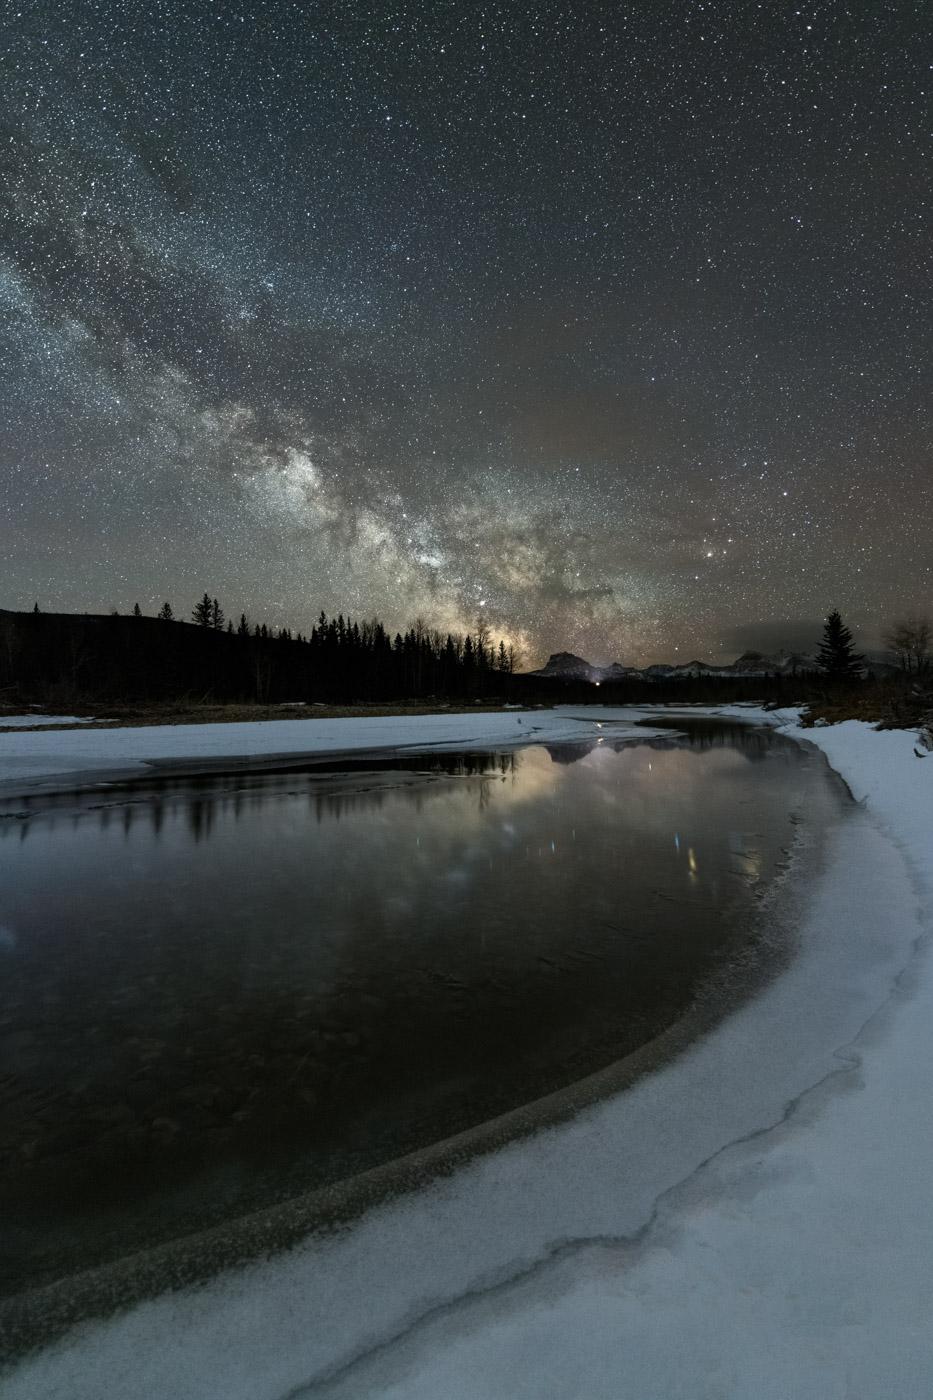 The Milky Way over the water